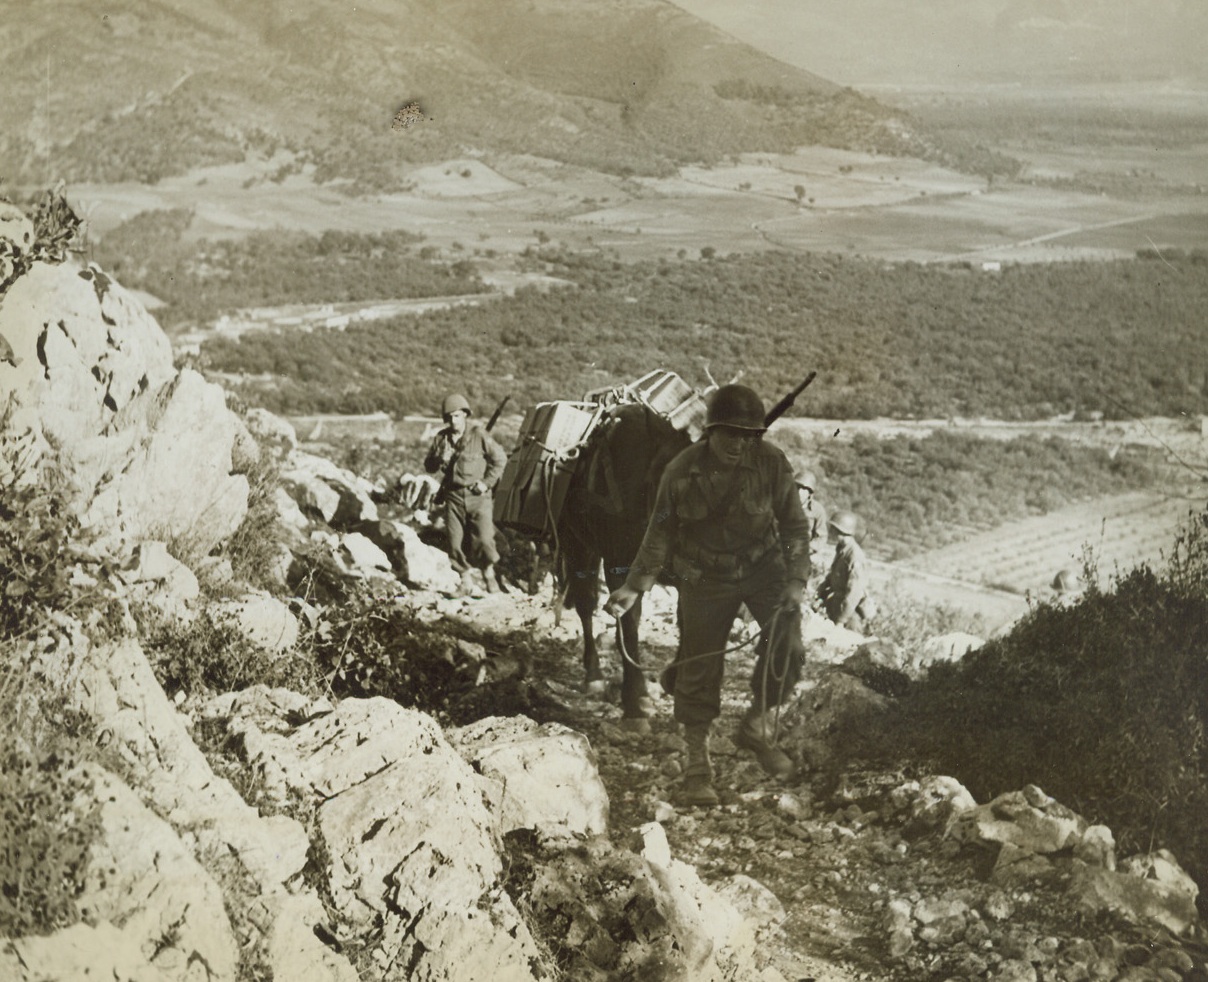 Ration Train, 11/28/1943. SOMEWHERE IN ITALY -- Carrying rations for our fighting men, a mule pack trail picks its way across the rocky slopes of Italy. Supplies and ammunition must be hauled over this rugged, mountainous terrain before they can reach our Fifth Army men as the front. Credit Line - WP-(Photo by Bert Brandt, ACME Correspondent for War Picture Pool);